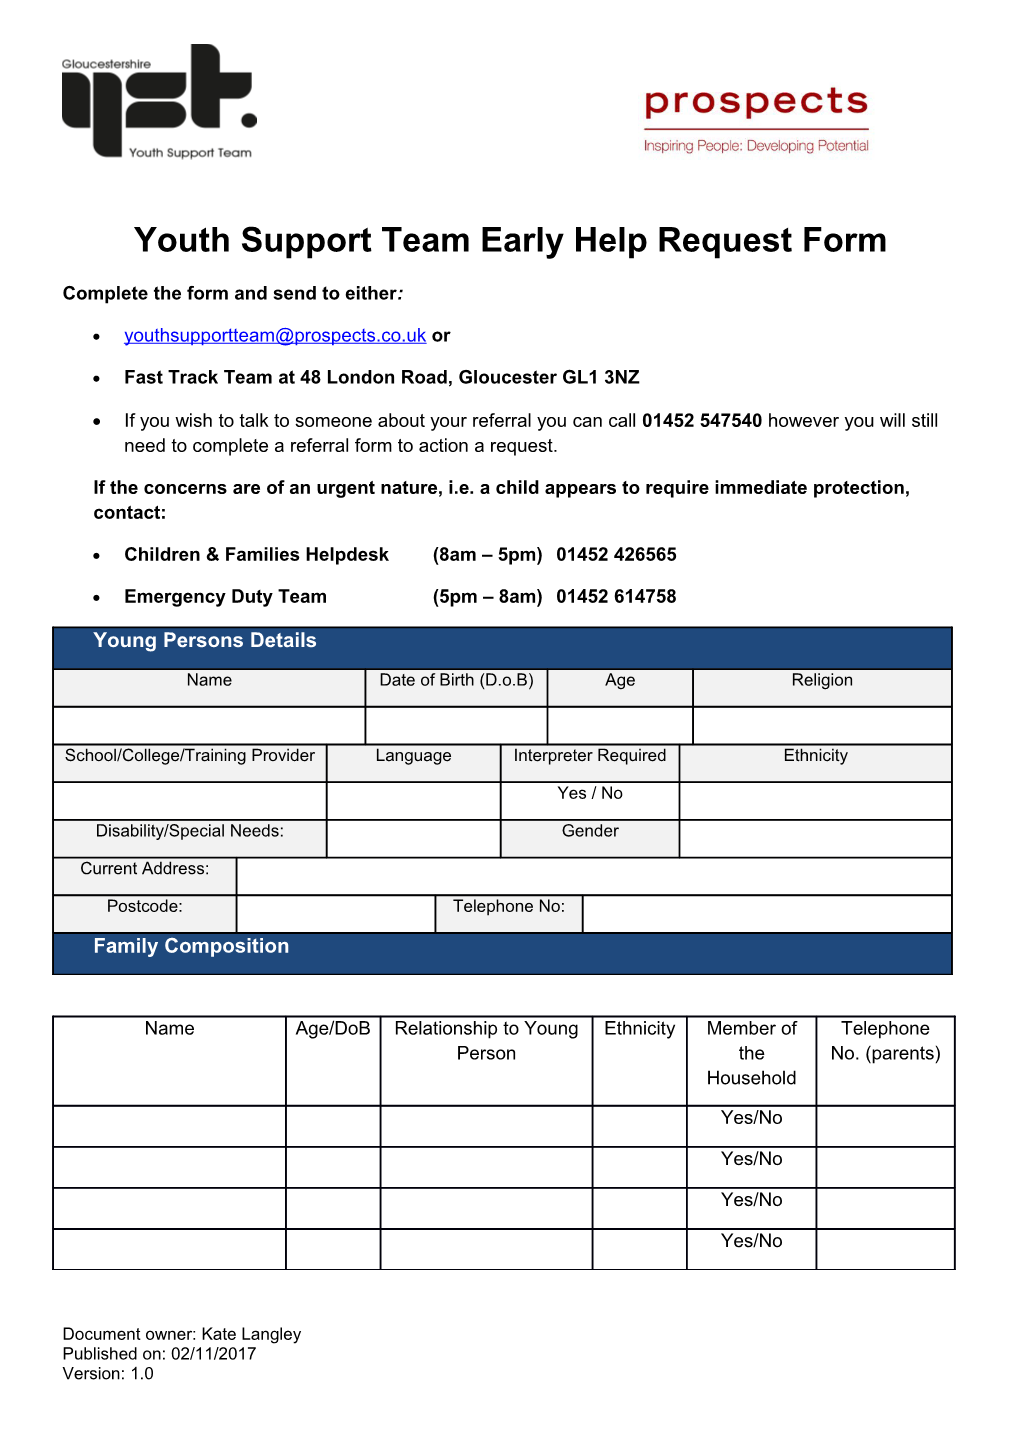 Youth Support Team Early Help Request Form